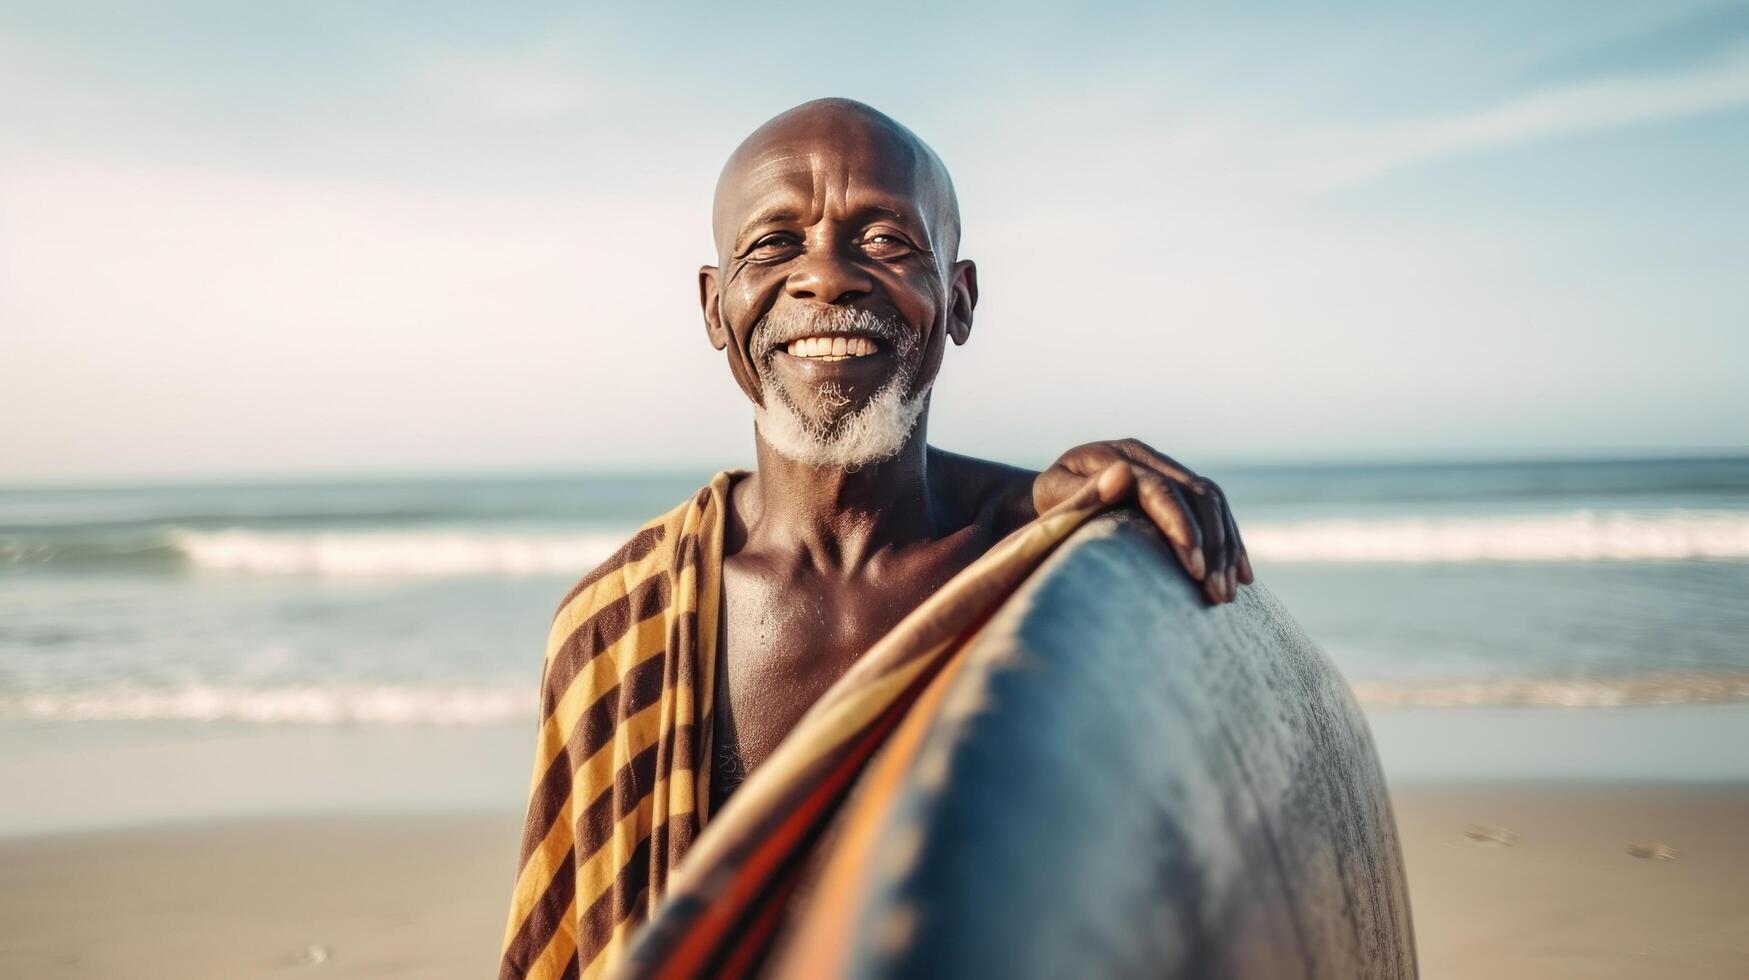 Smiling man with surf board. Illustration photo